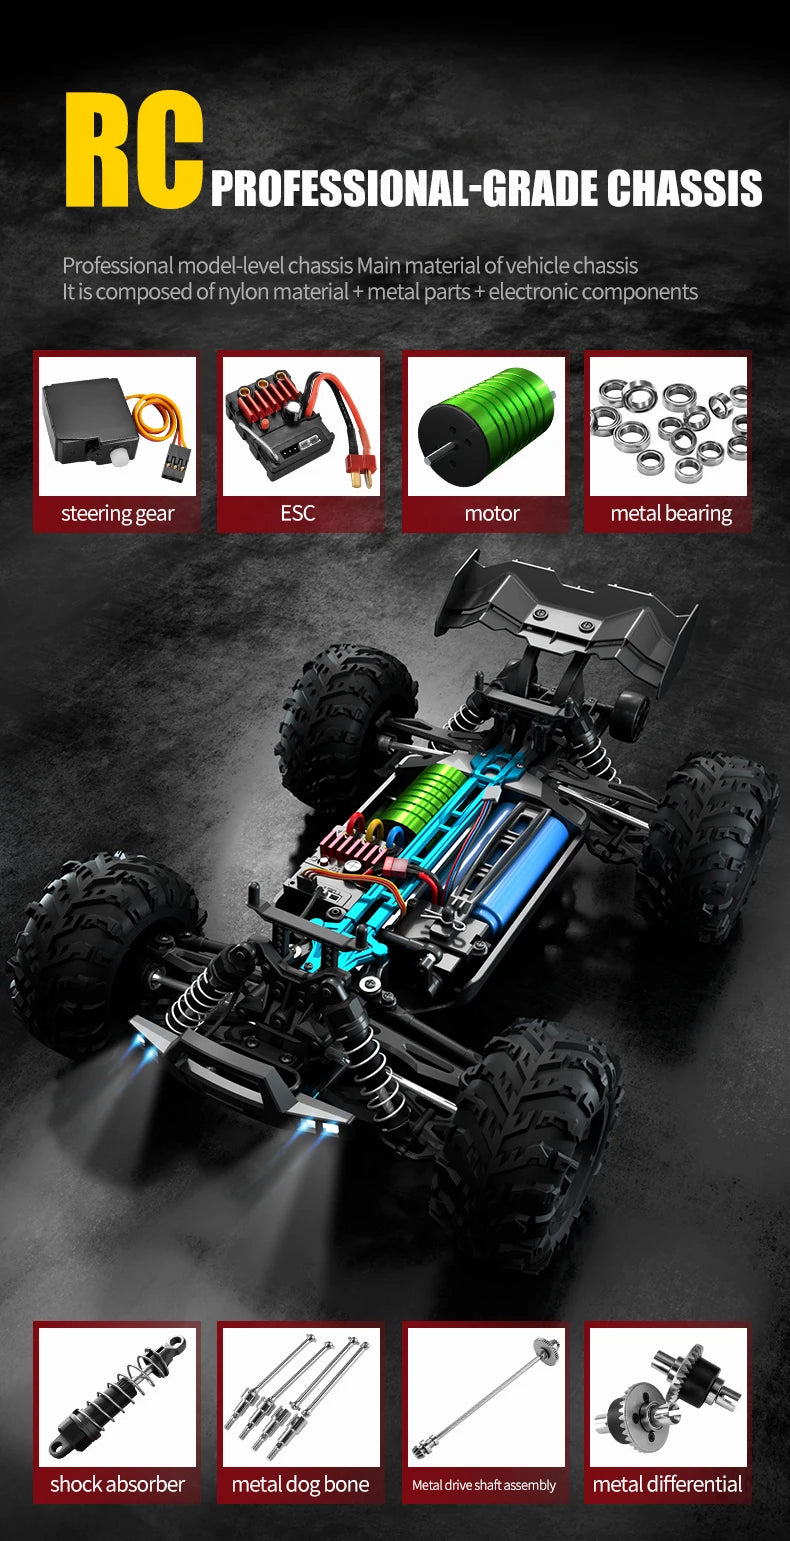 Rc Car, RC PROFESSIONAL-GRADE CHASSIS Professional model-level chassis It